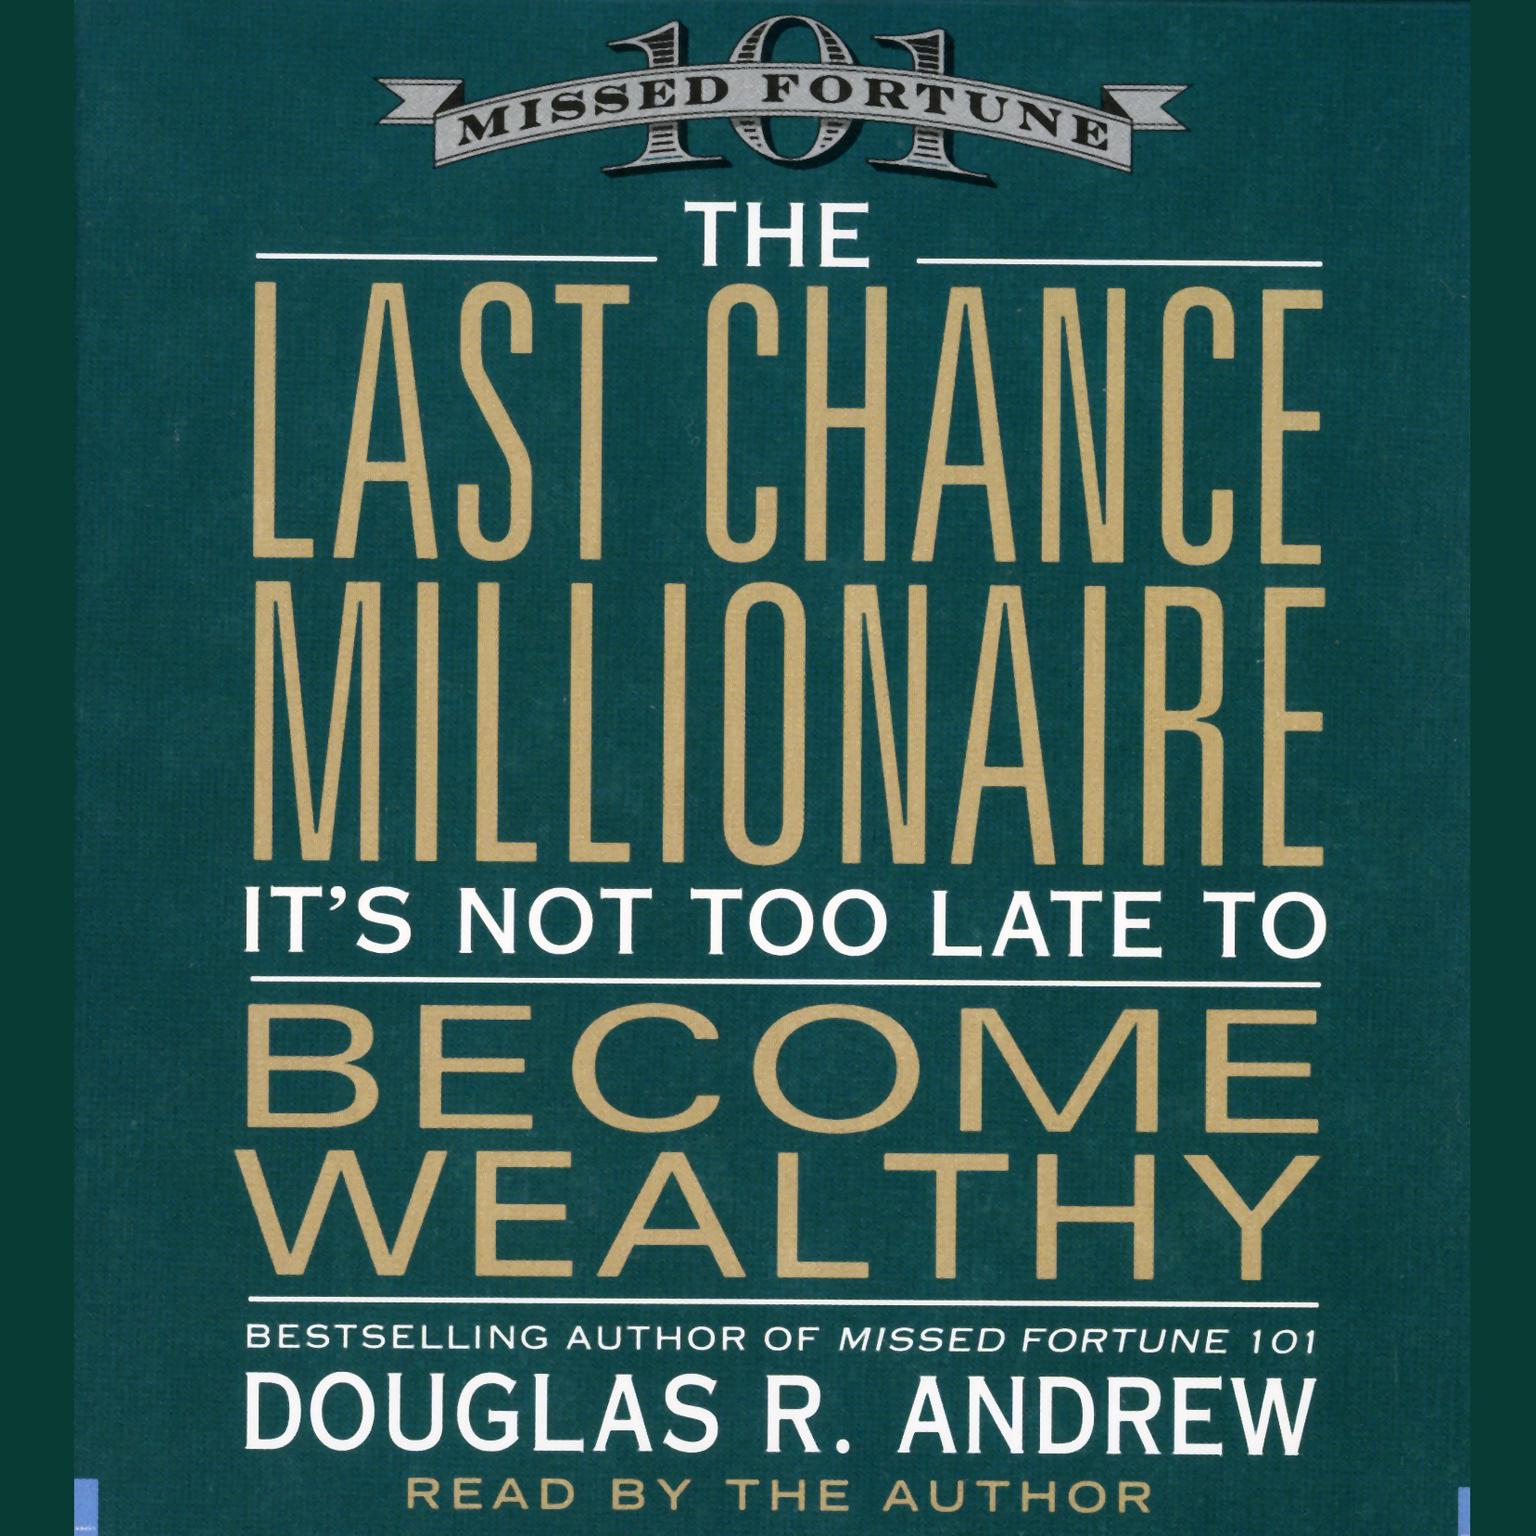 The Last Chance Millionaire (Abridged): Its Not Too Late to Become Wealthy Audiobook, by Douglas R. Andrew